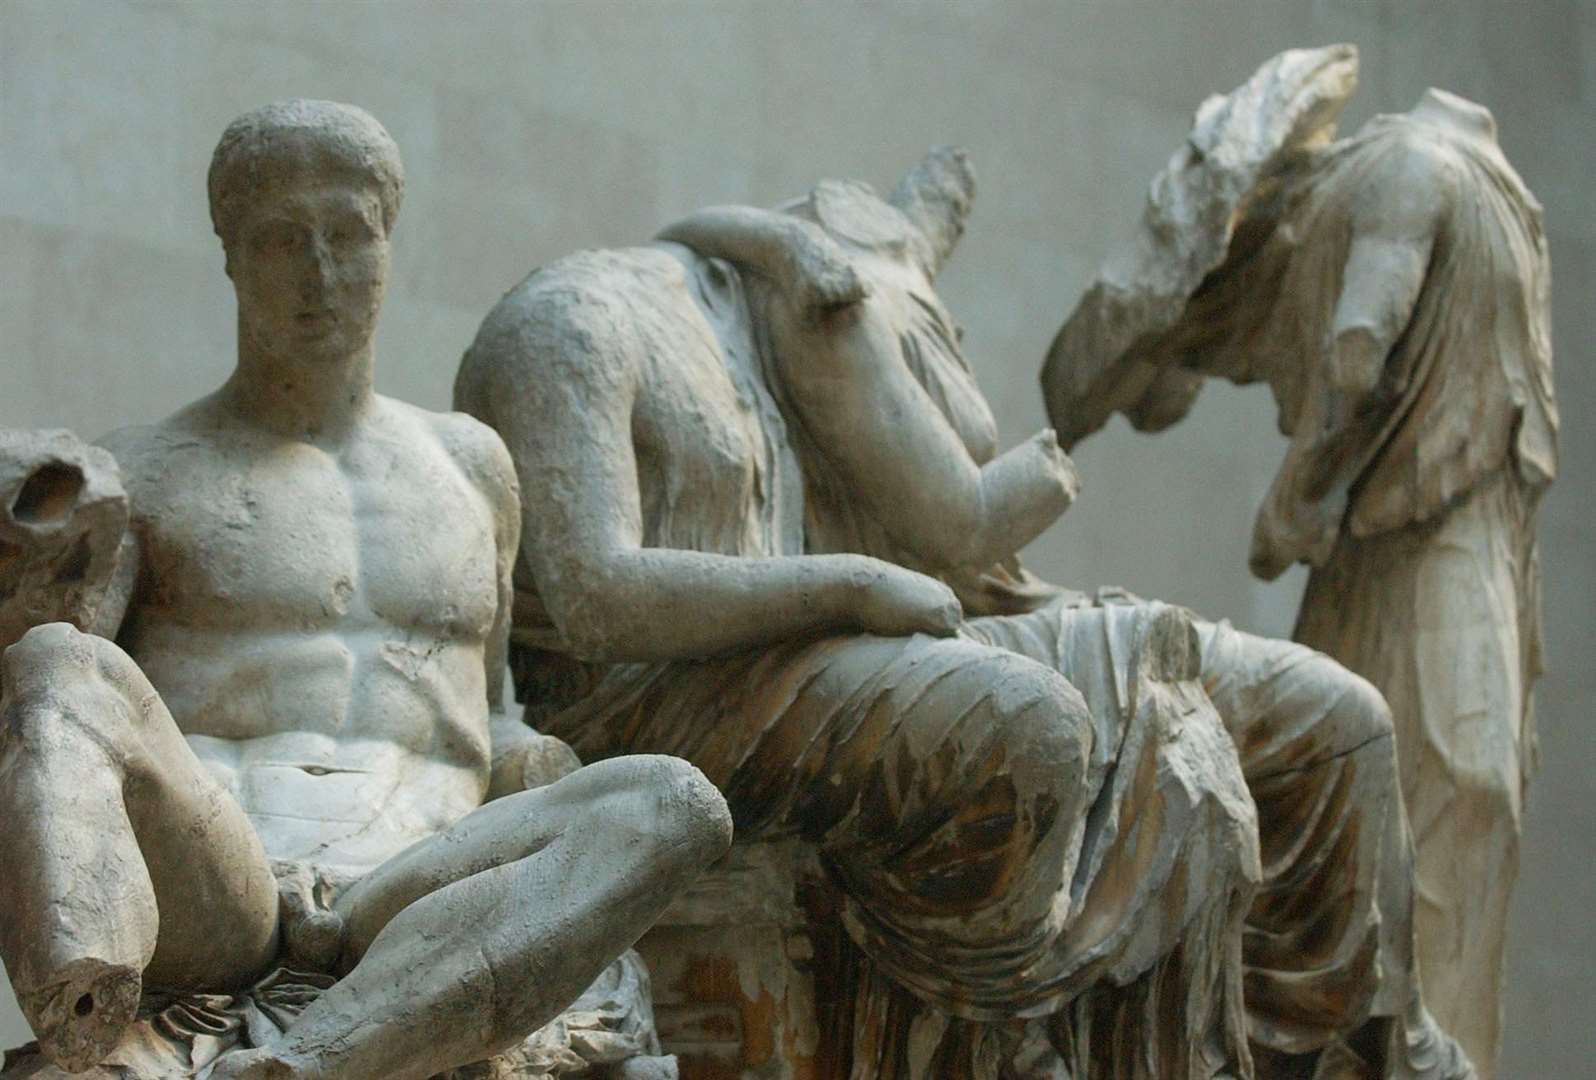 Sections of the Parthenon Marbles in the British Museum (Matthew Fearn/PA)